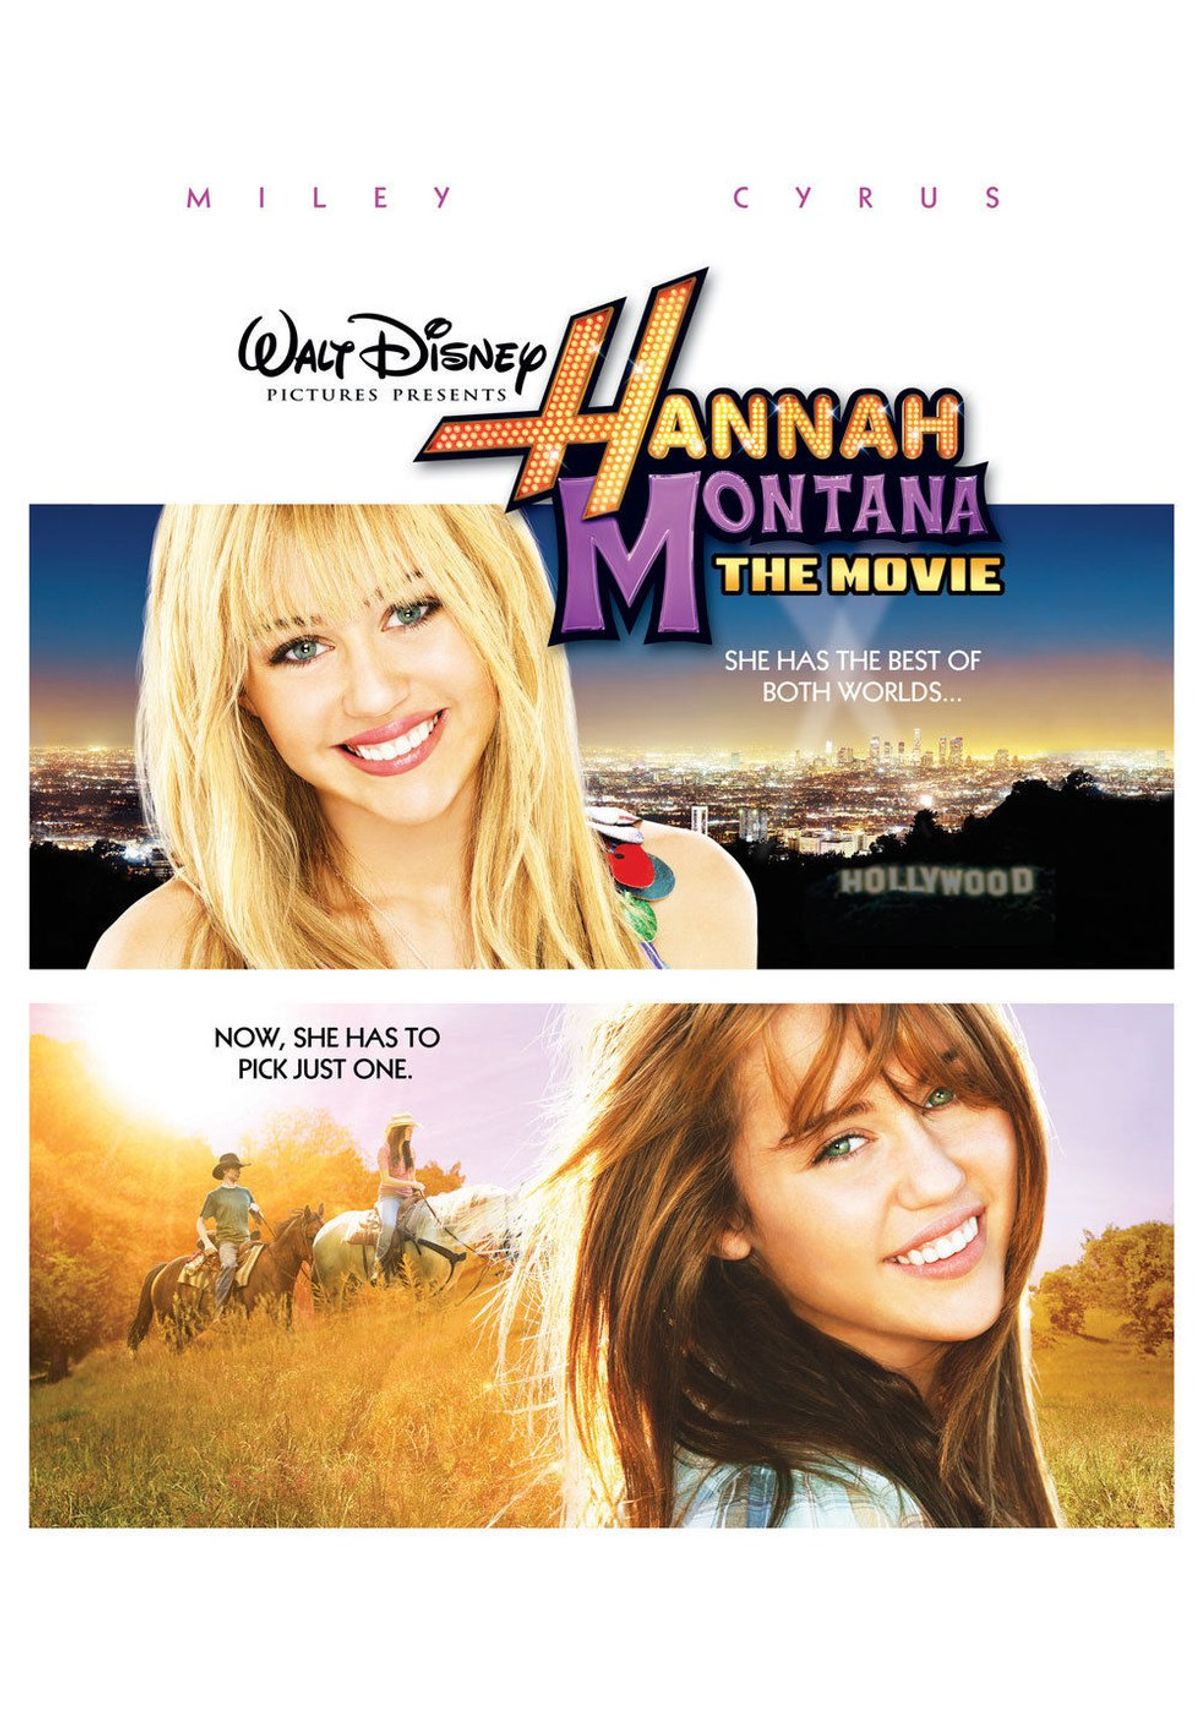 37 Questions About the Hannah Montana Movie